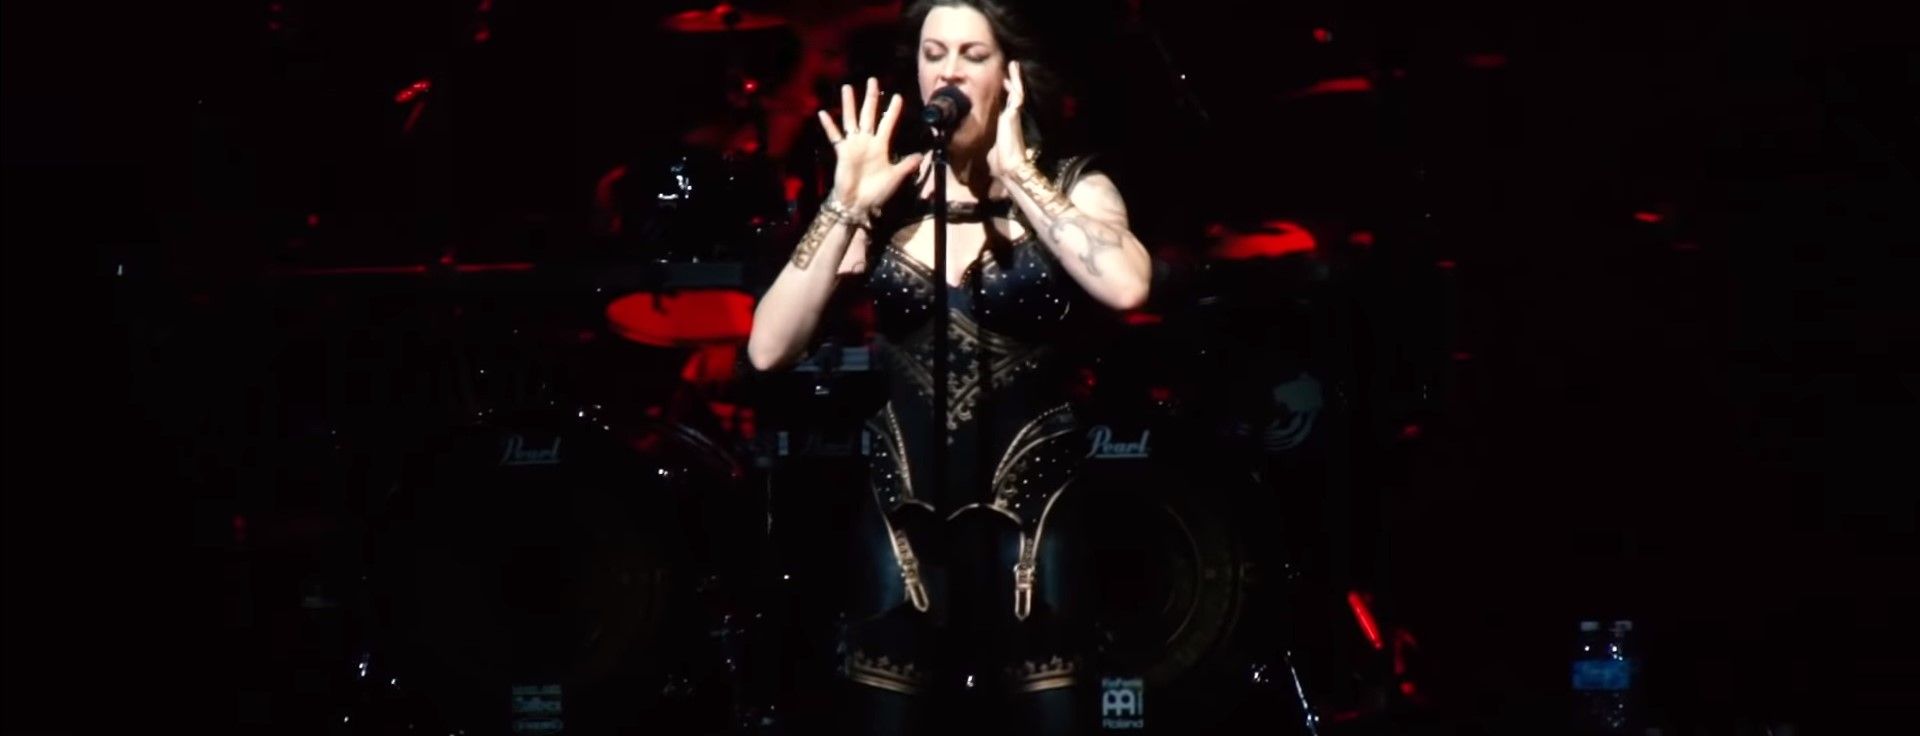 Nightwish - Devil And The Deep Dark Ocean (Live In Buenos Aires 2019)